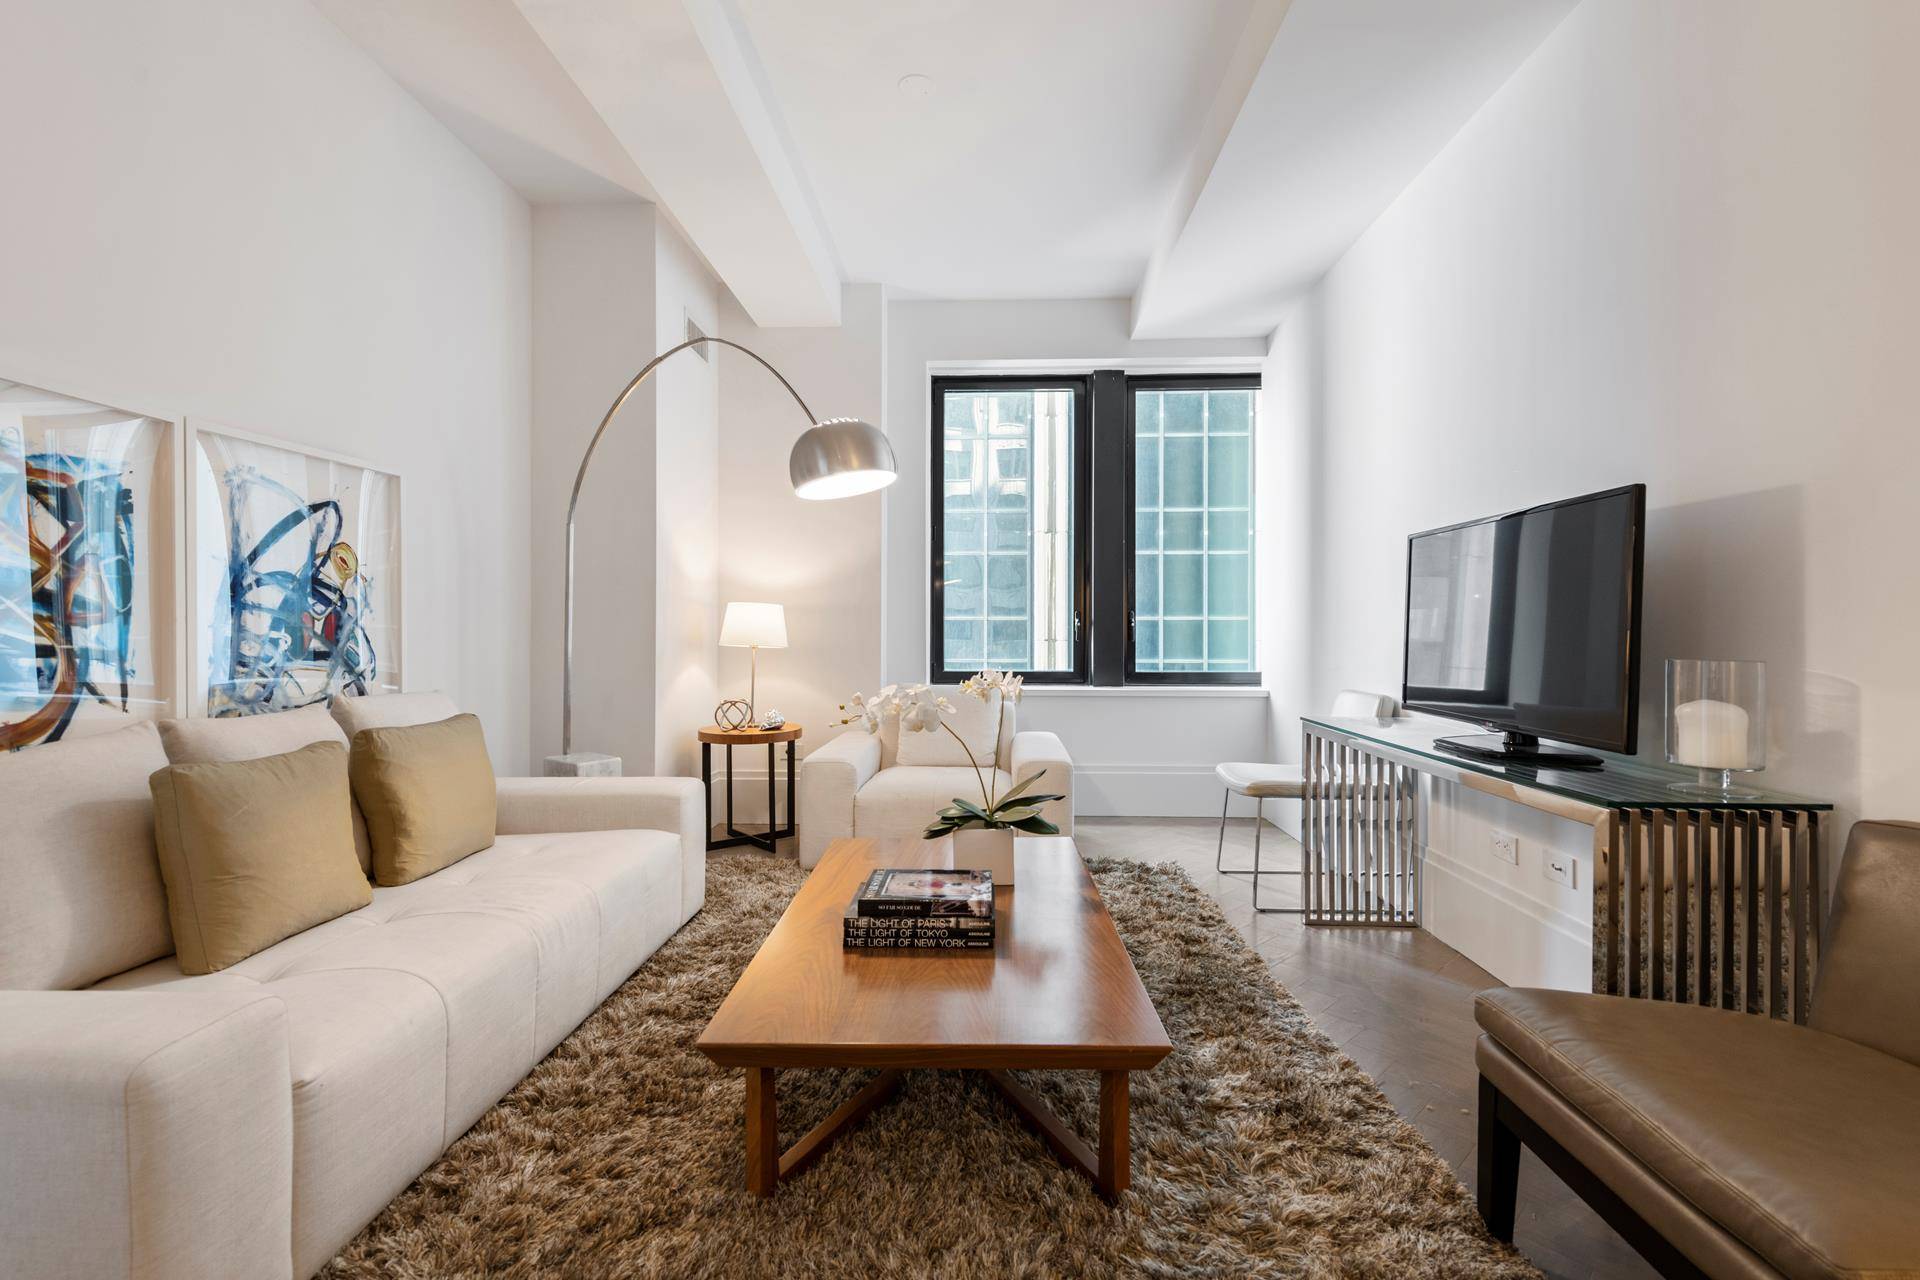 Incredible opportunityResidence 14C is a 1, 263 SF 2 bedroom 2 bath nestled in a re imagined Art Deco gem situated just one block from the East River.